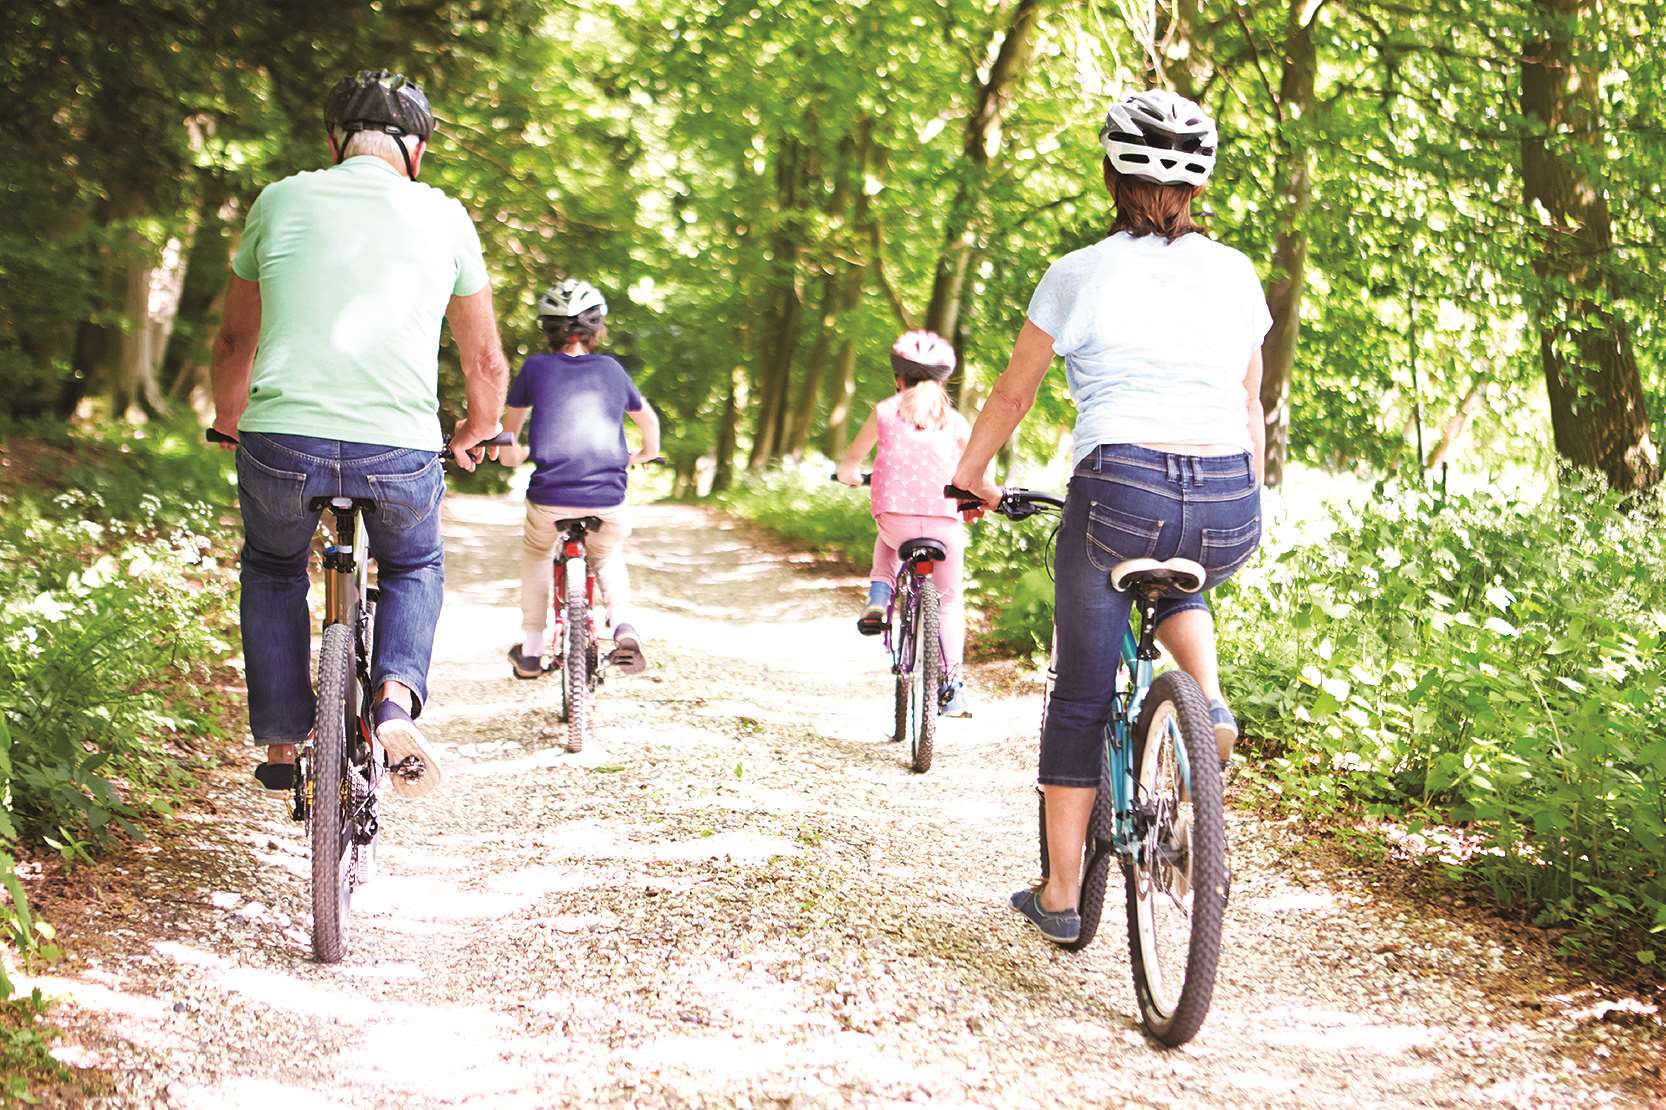 Get out and enjoy a family bike ride this weekend